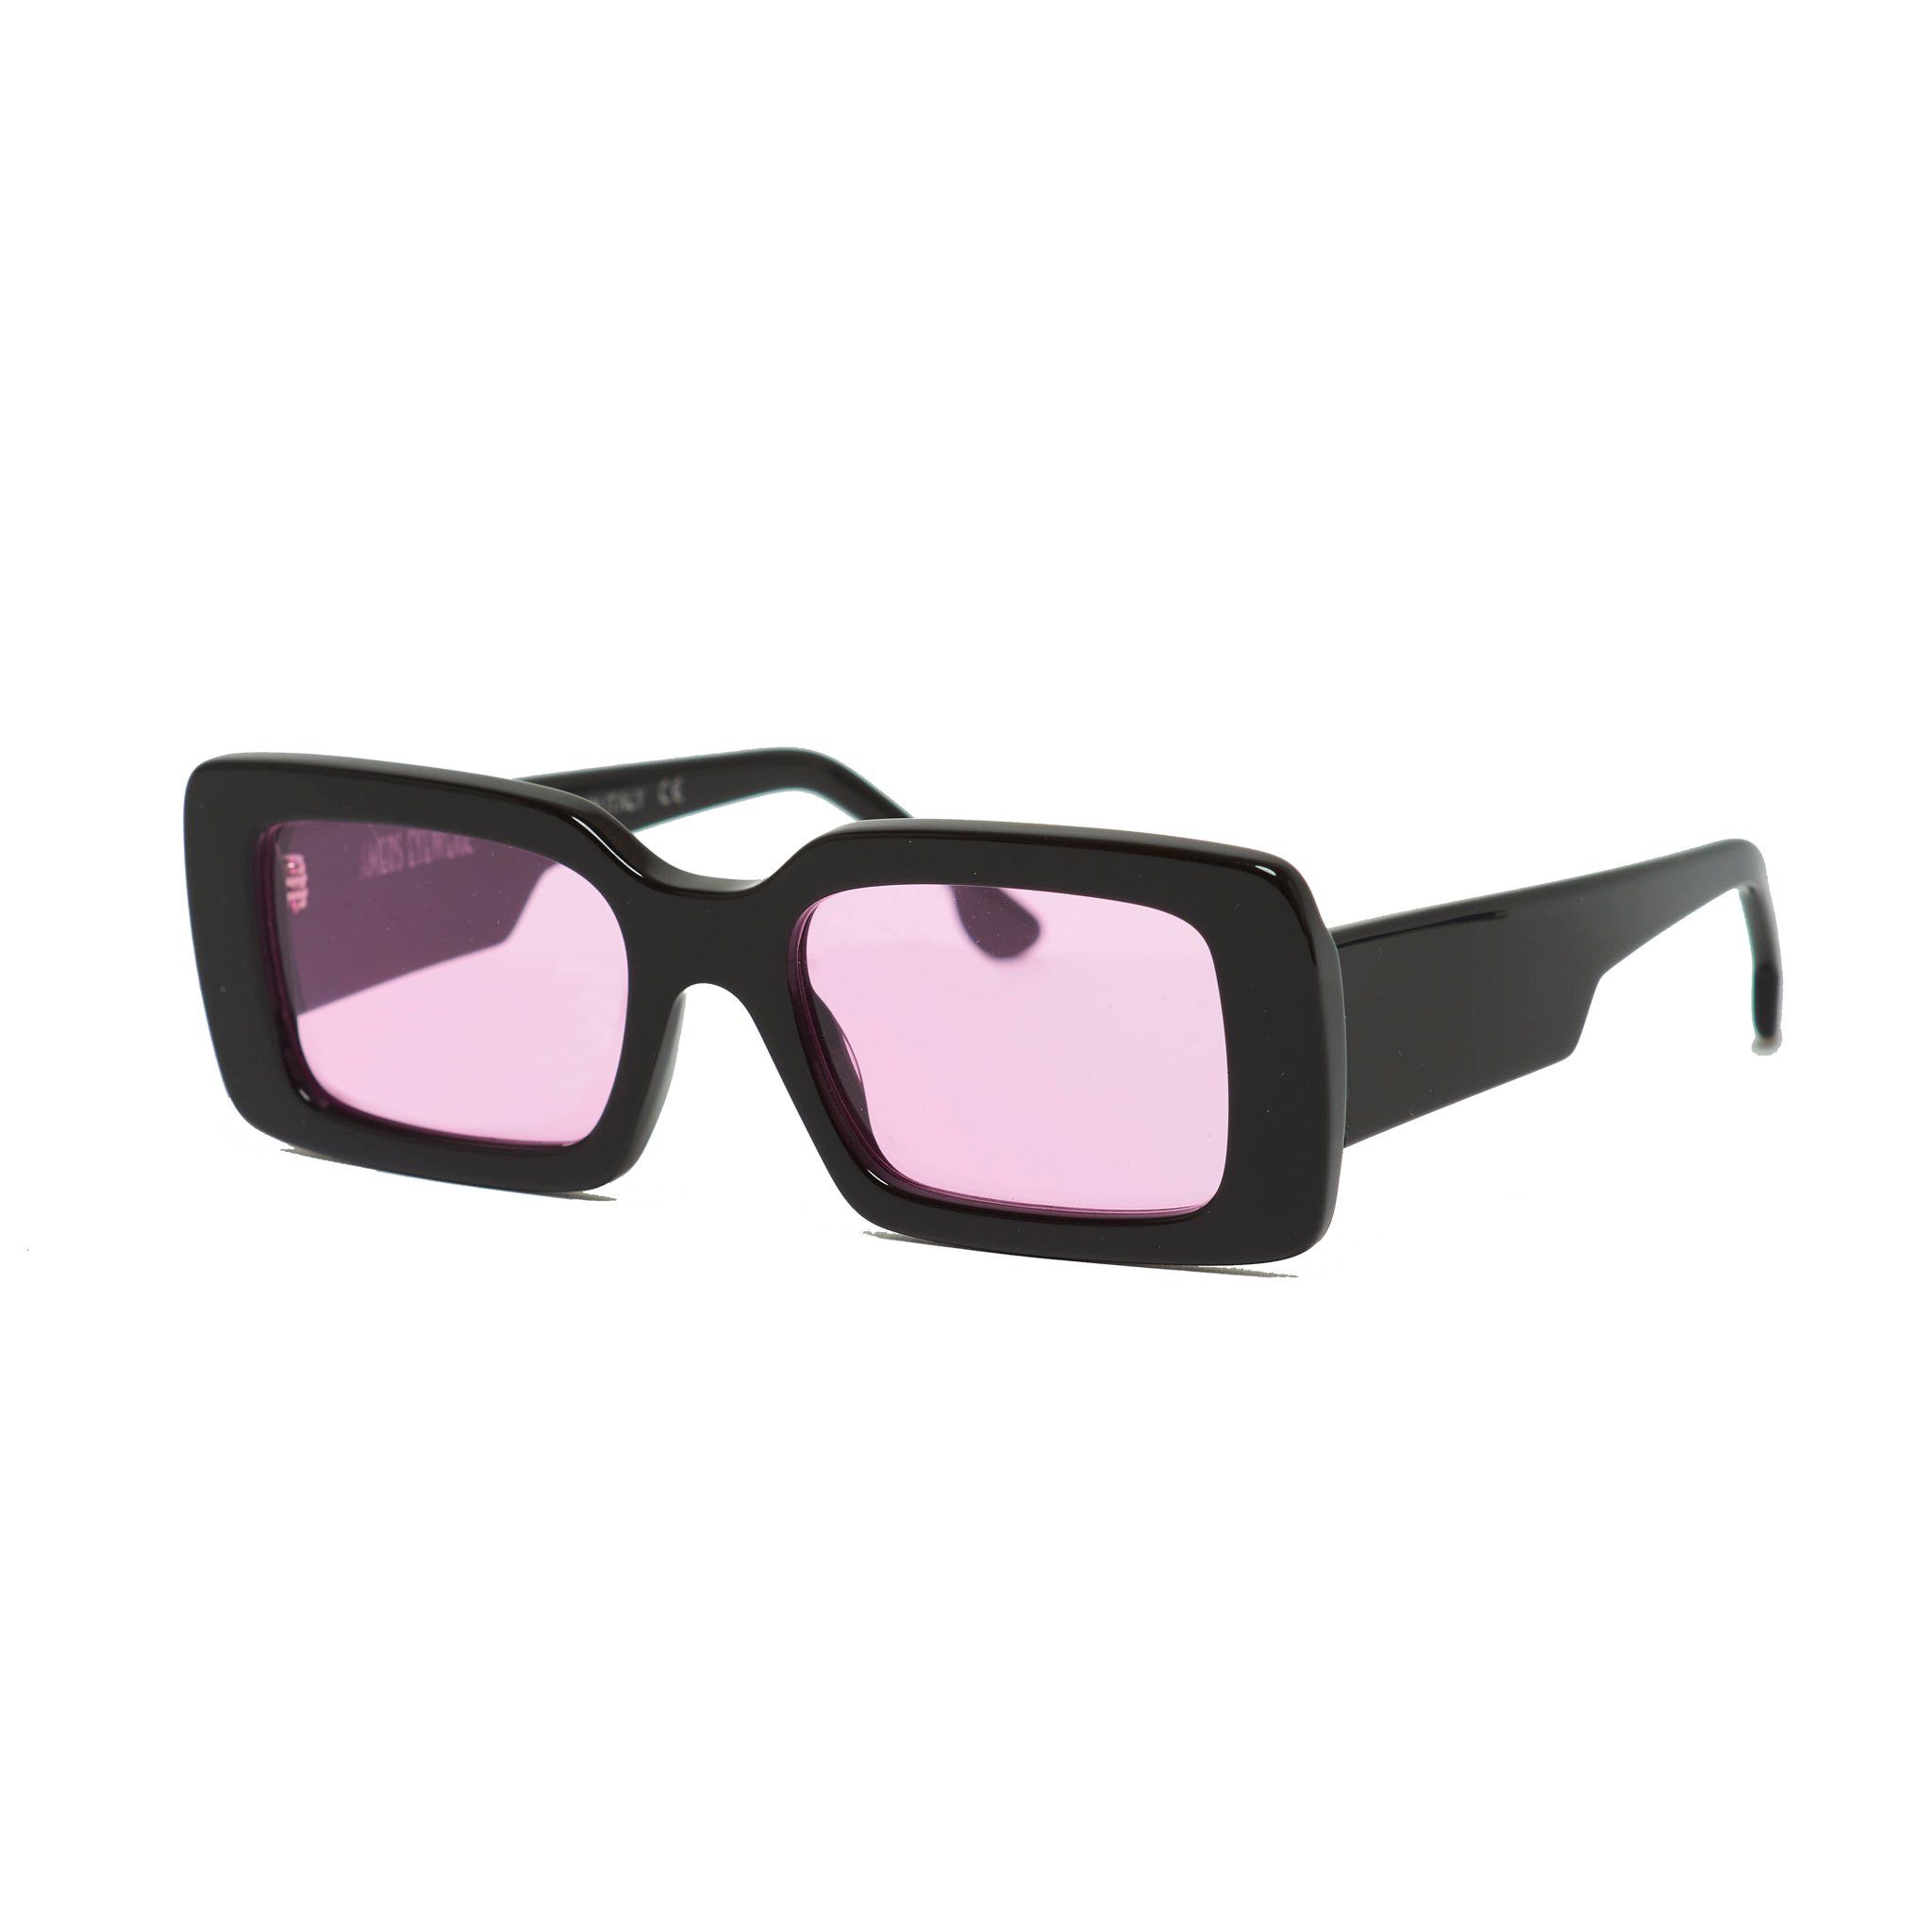 Black sunglasses frames with pink lenses handmade in italy. Front view